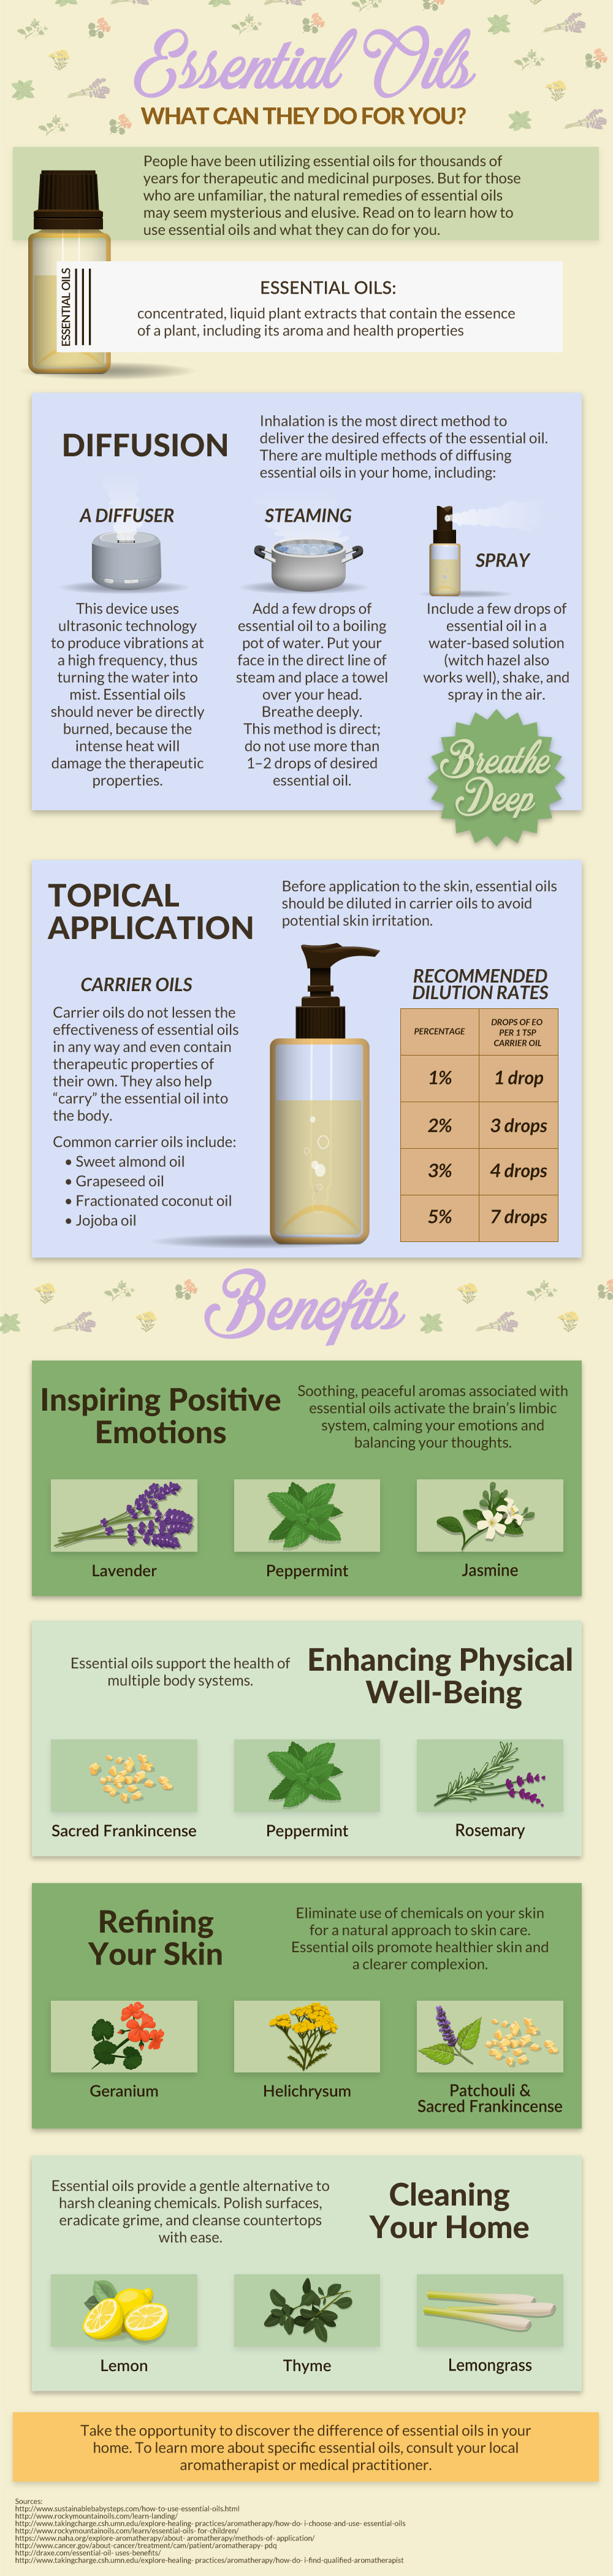 Essential Oils: What Can They Do For You?